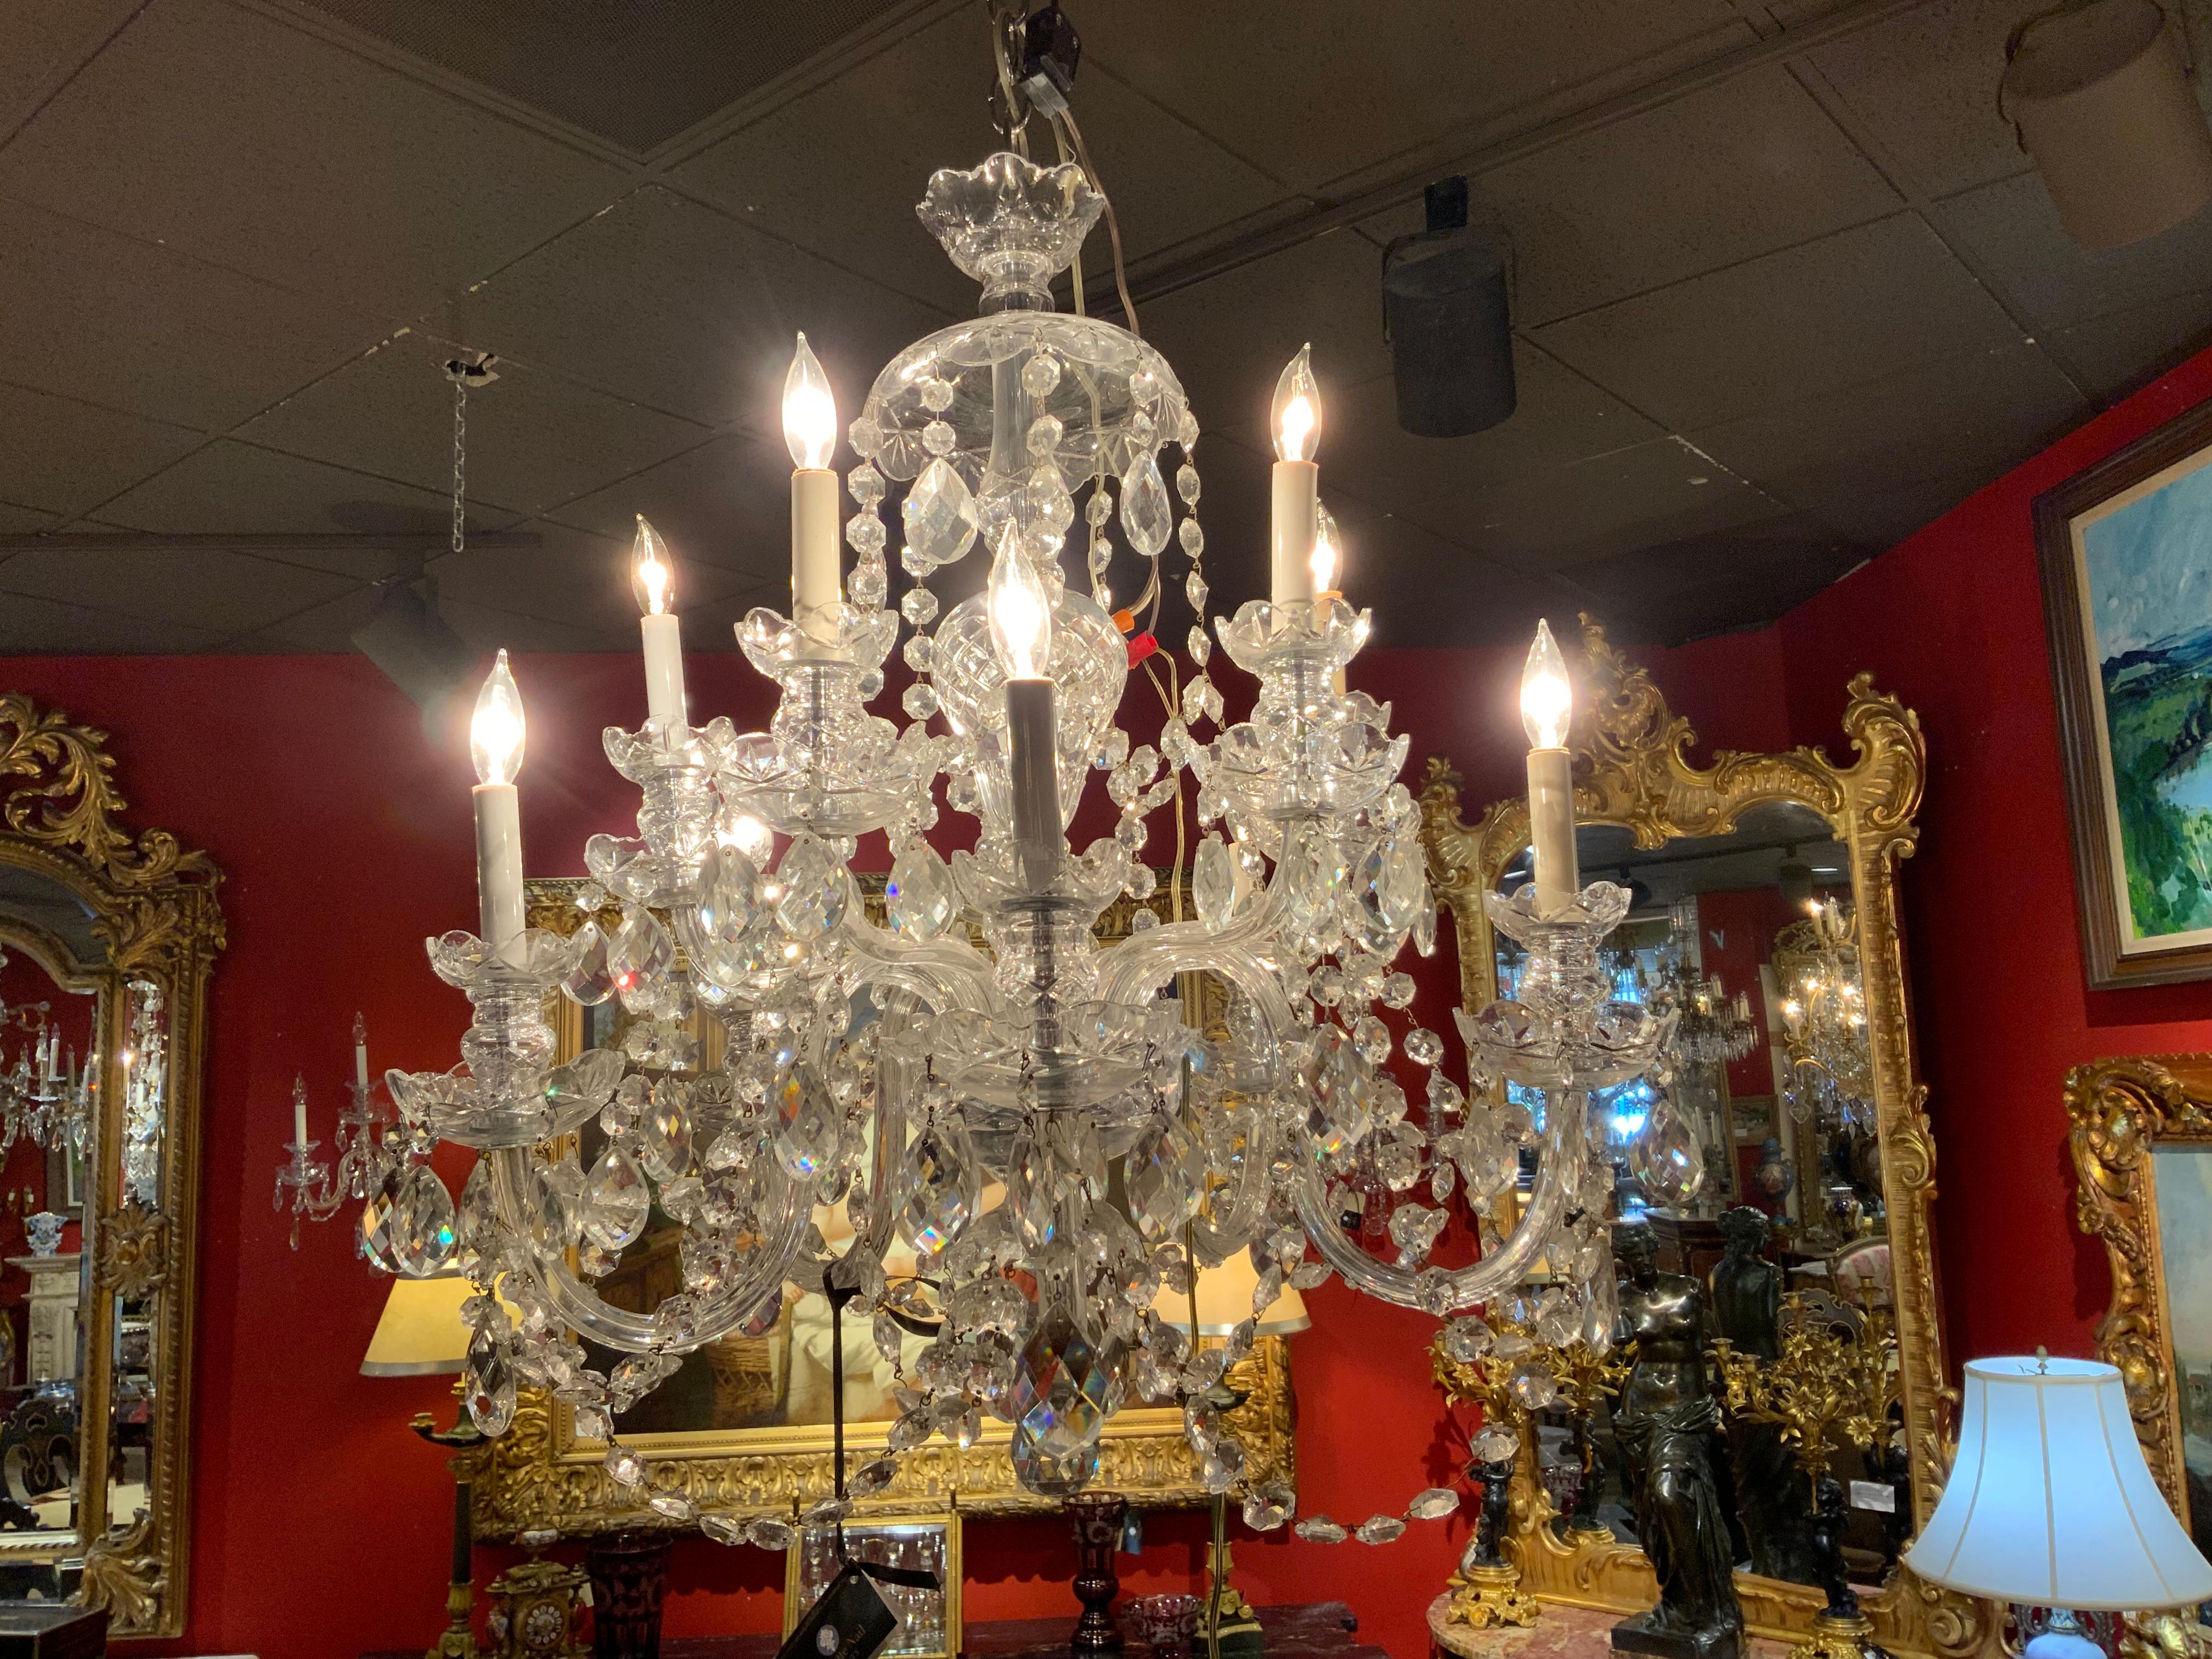 This chandelier has very bright and clear crystal with etched design
On the bobeches. It has ten lights with good wiring and also comes
With the original canopy. There are no chips breaks or missing crystals.
